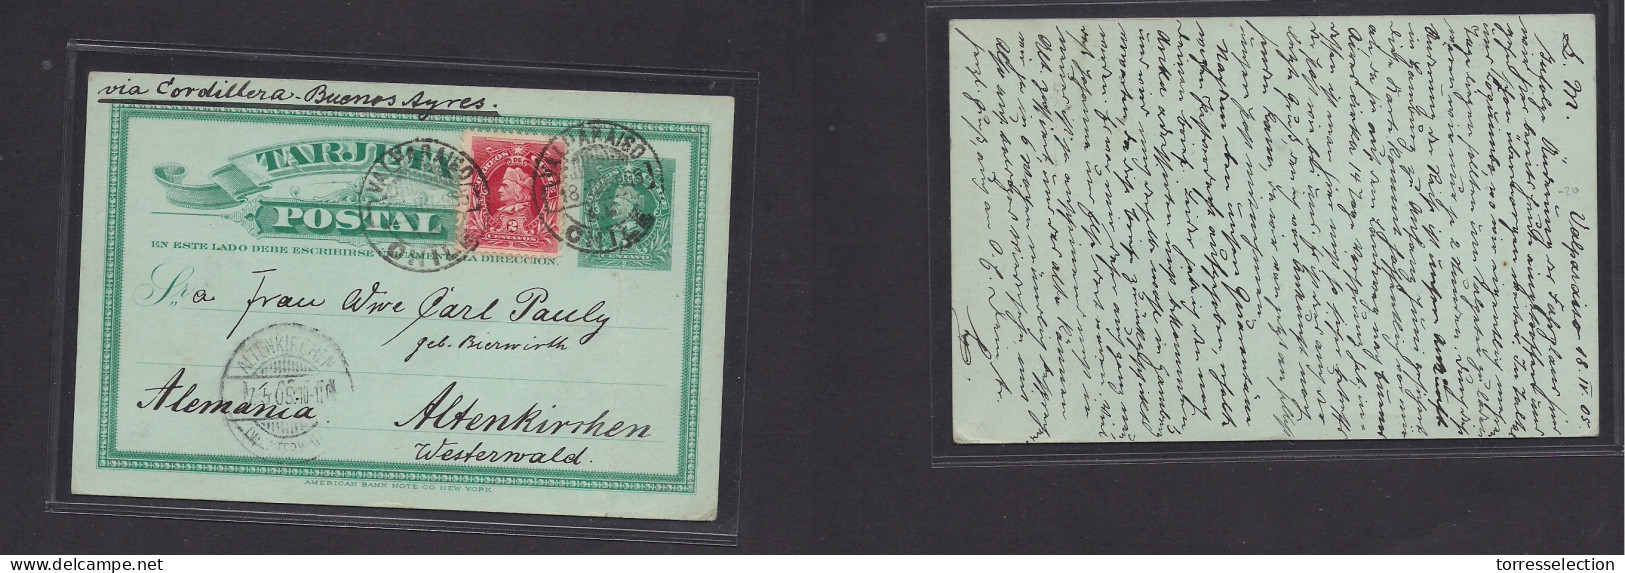 CHILE - Stationery. 1905 (18 Apr) Valp - Germany, Alterkirchen (17 May) 1c Green Stat Card + 2c Red Adtls Via Cordillera - Chile